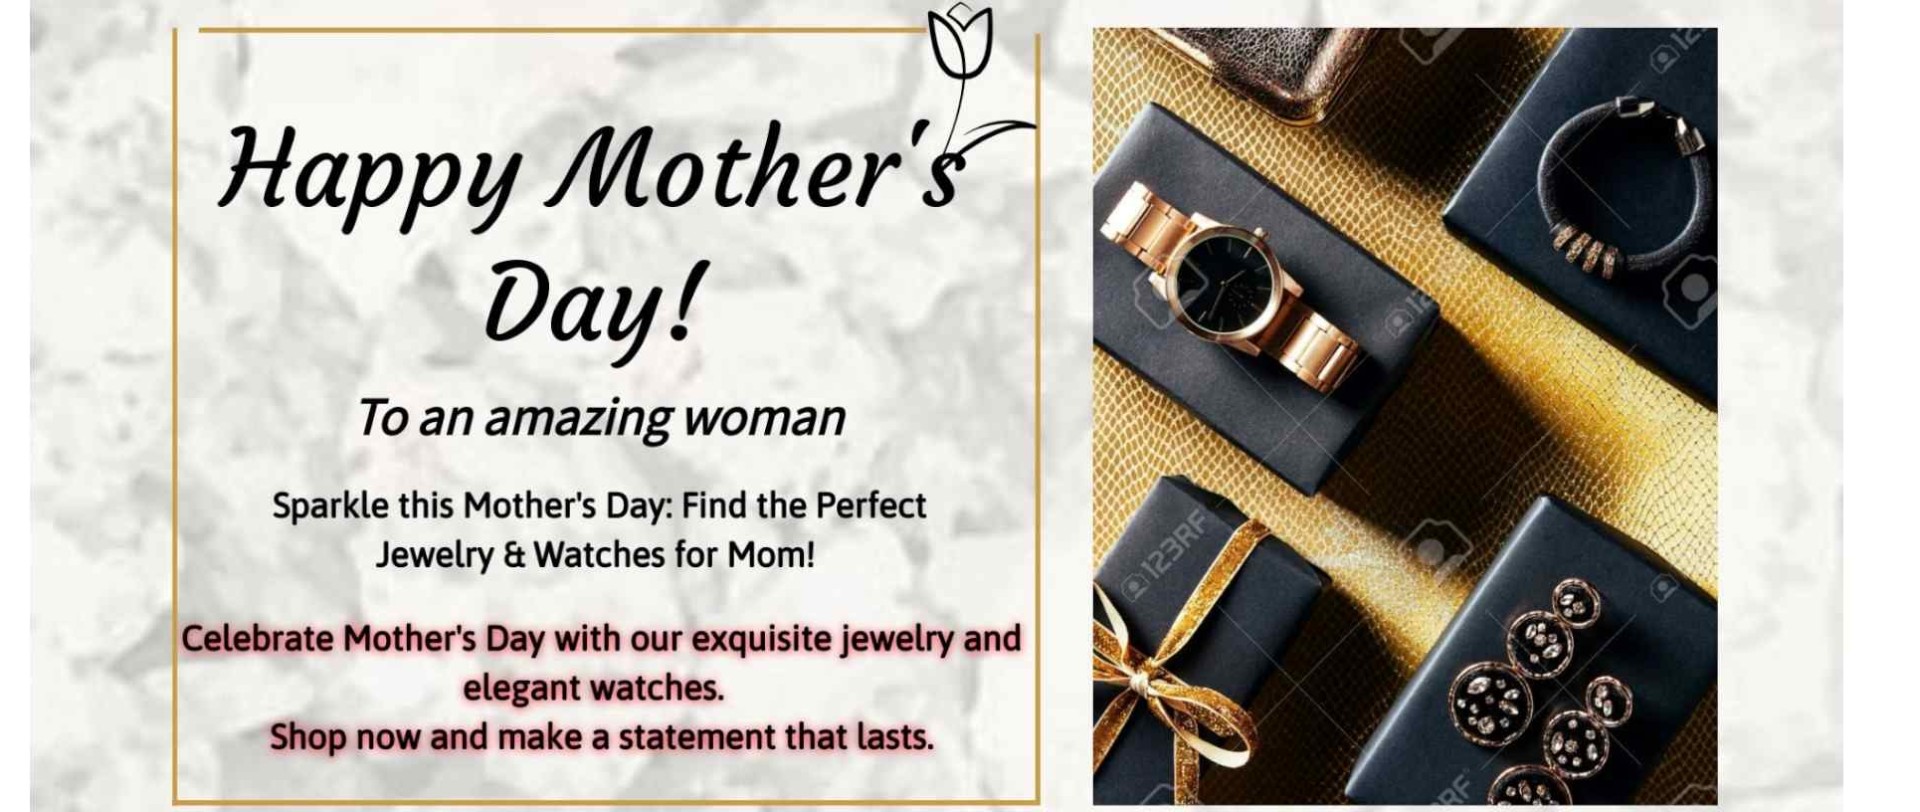 Happy Mothers day ! Sparkle this Mothers day: Find the perfect Jewellery & Watch for mum